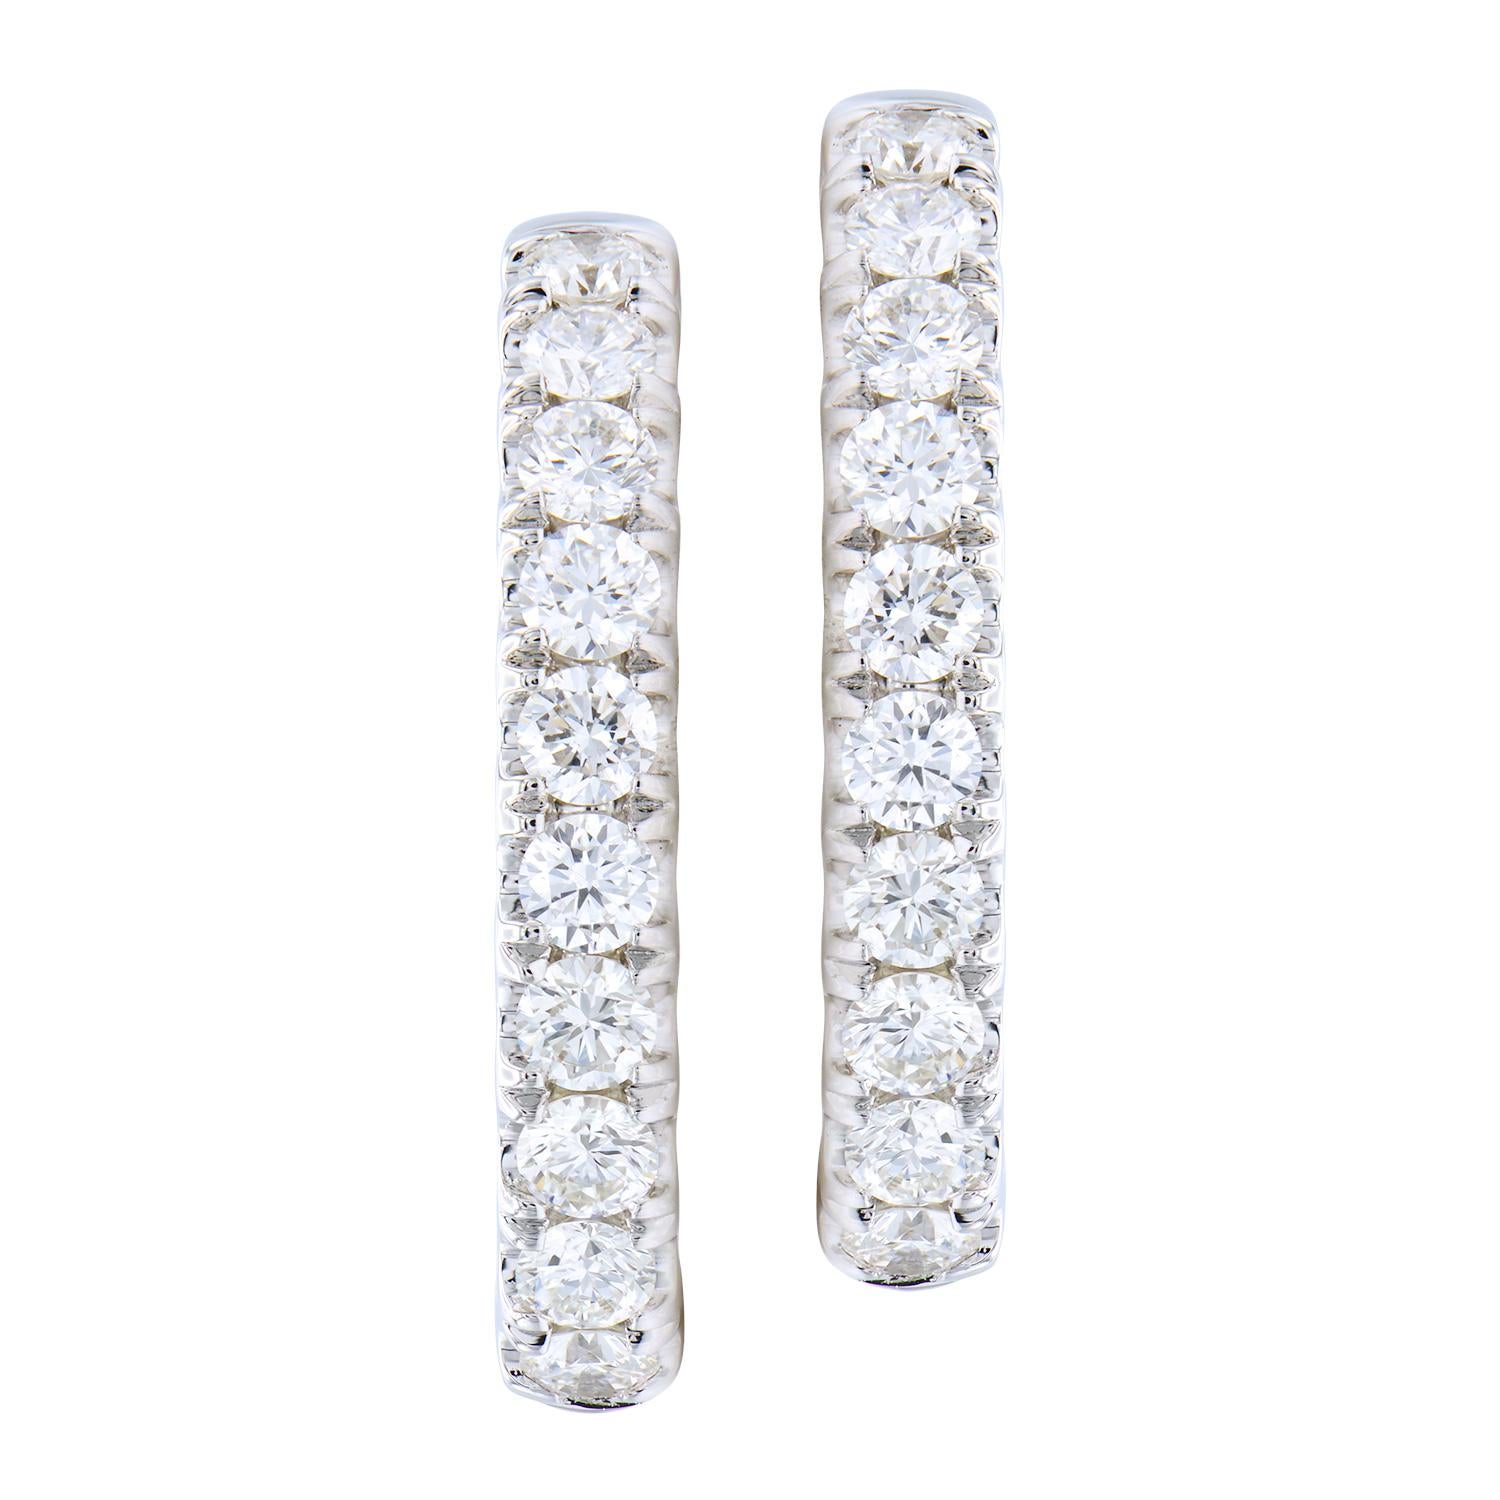 These stunning hoop earrings have diamonds on the inside and outside to give a beautiful sparkle from every angle. There are 32 round VS2, G color diamonds totaling 1.37 carats. 10 diamonds are on the front outside of the hoop and 6 on the inside of